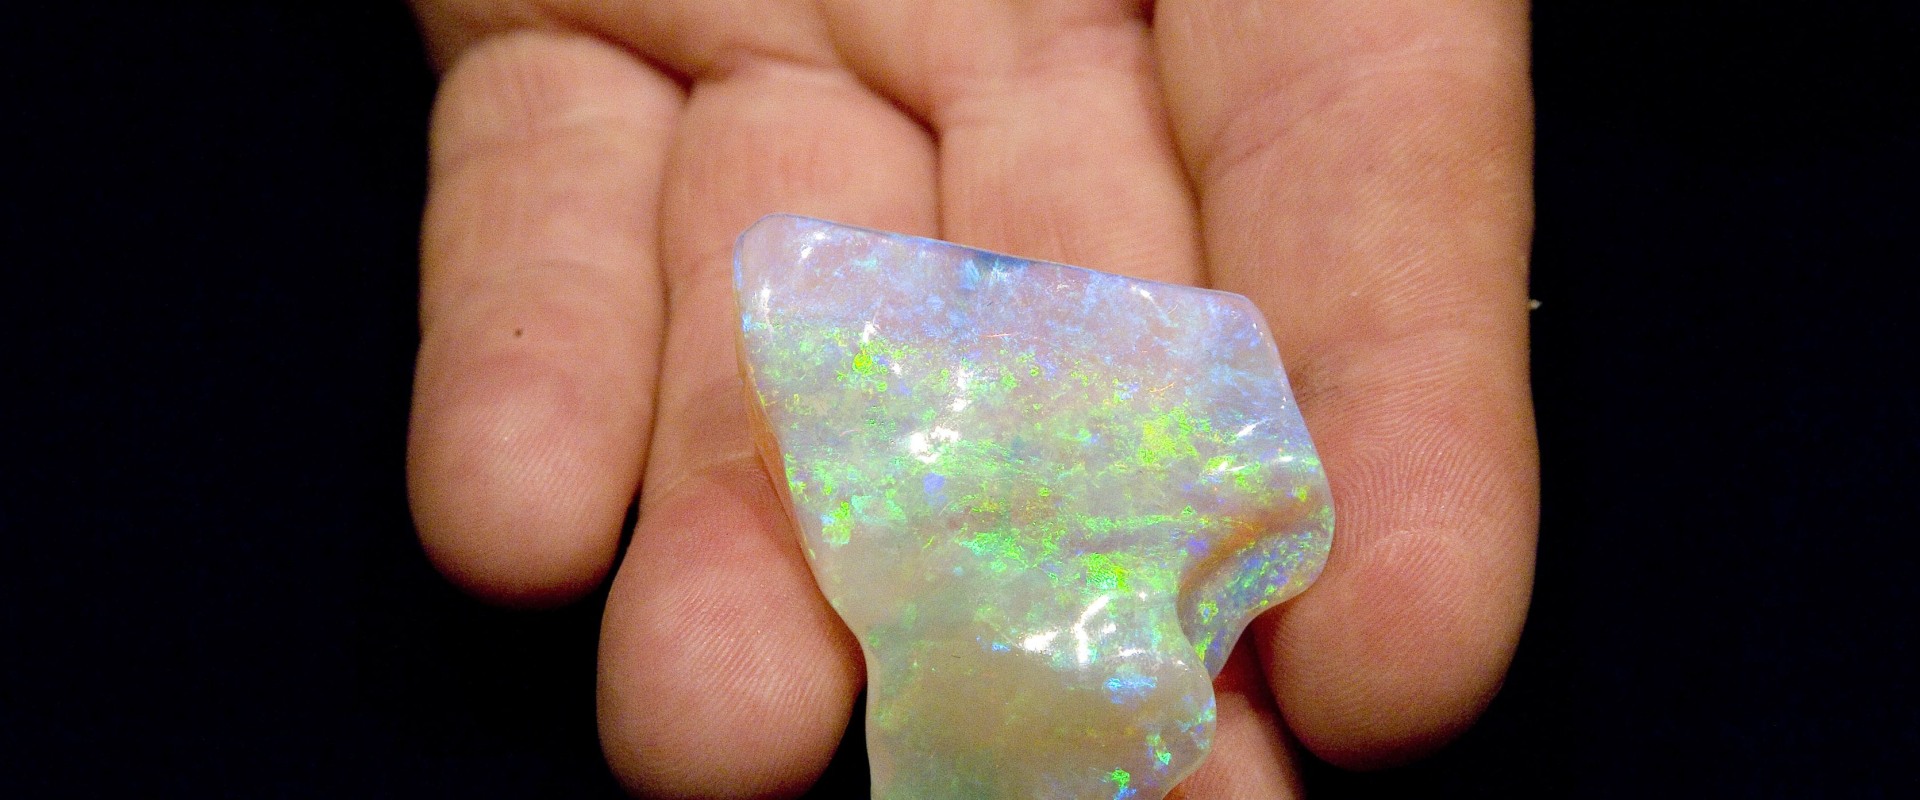 Do opals have special powers?